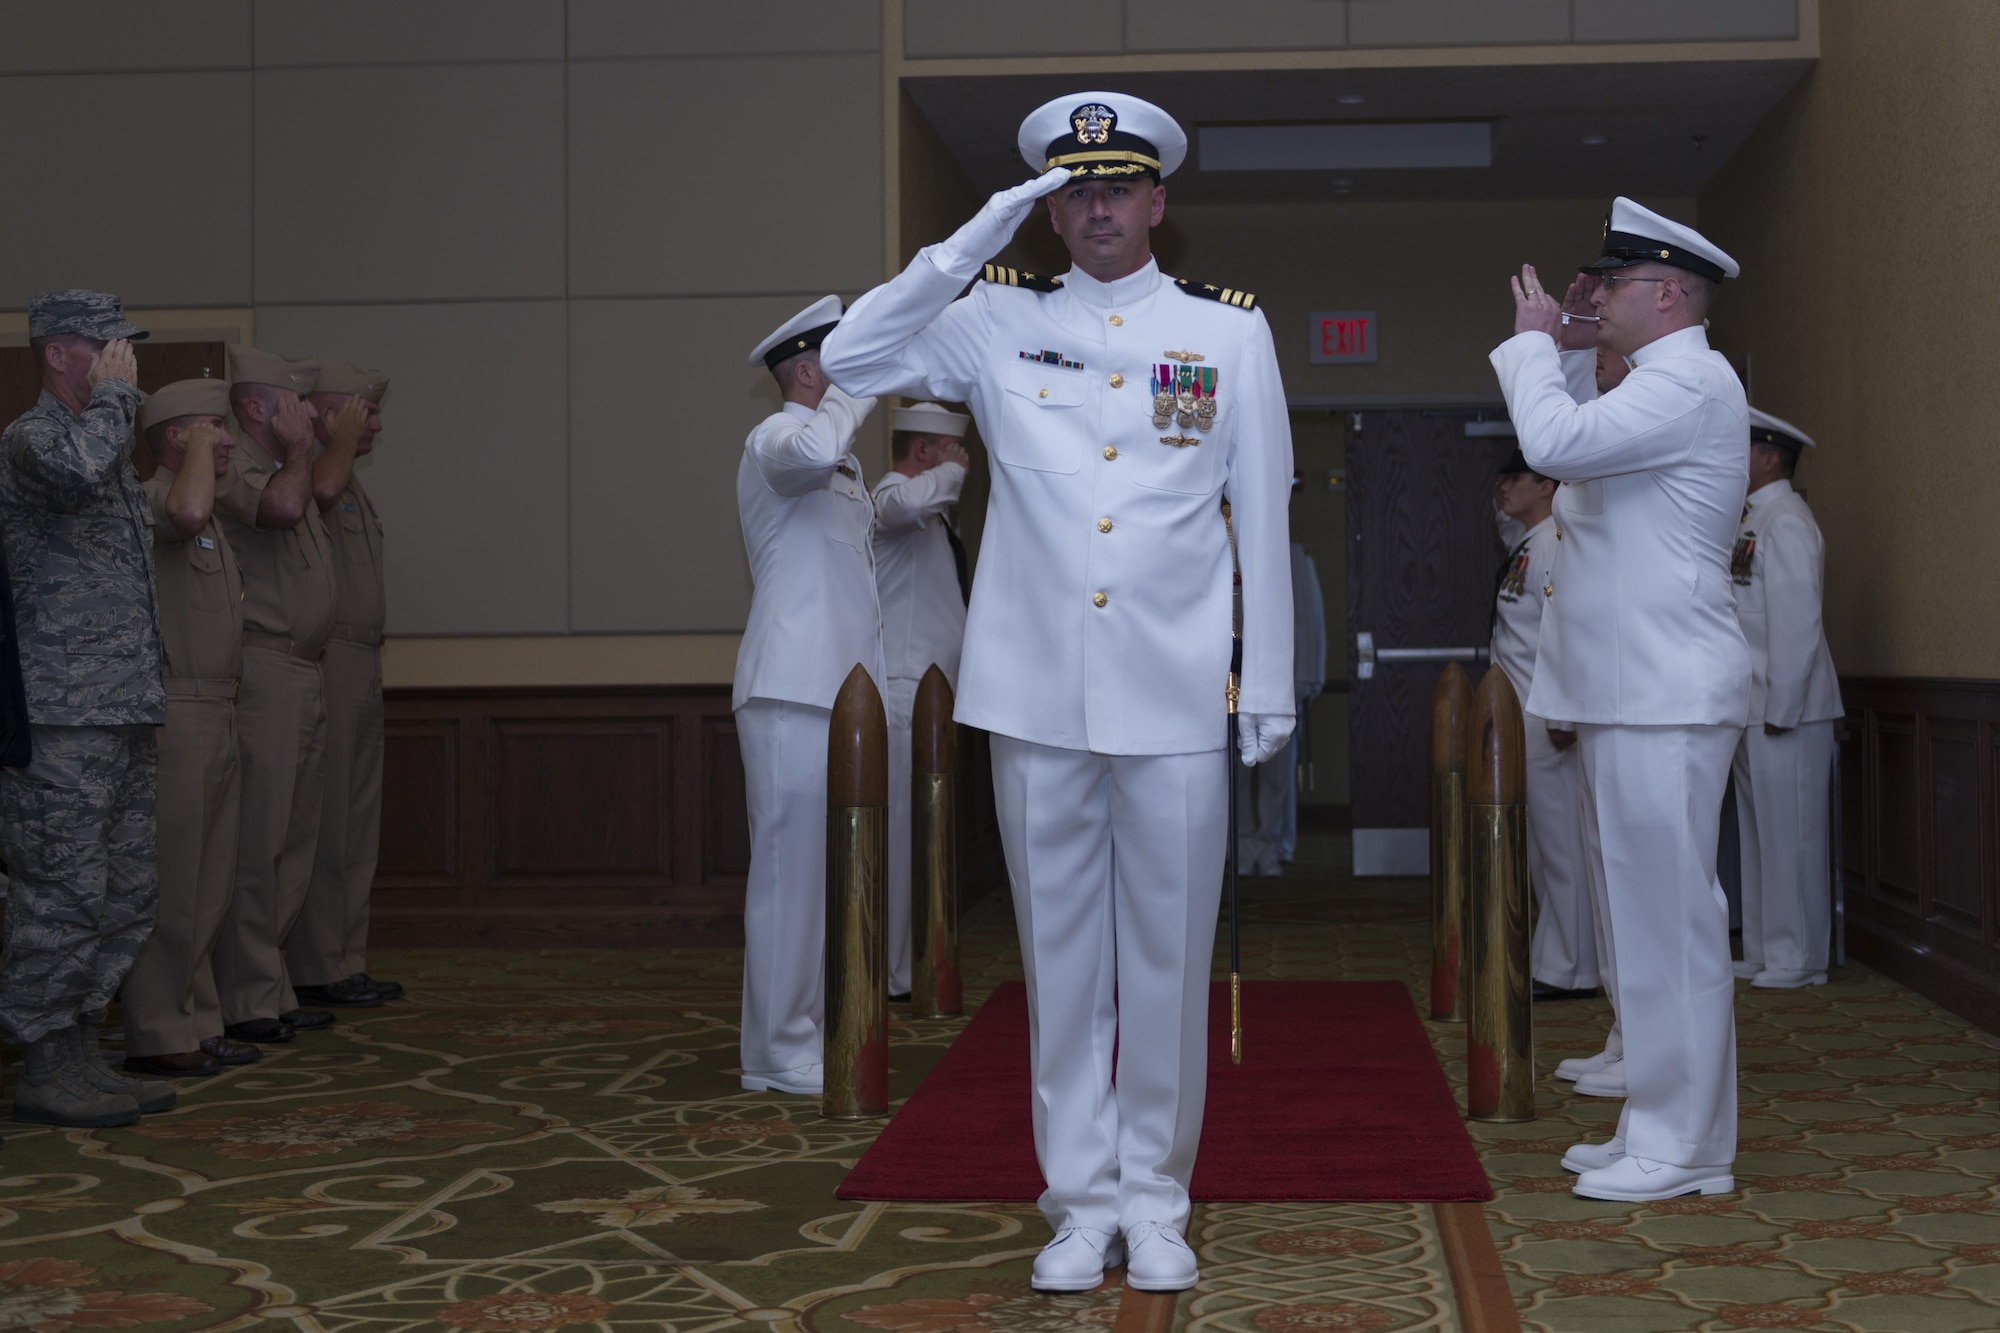 U.S. Navy Cmdr. Timothy Knapp, incoming Center for Naval Aviation Technical Training Unit Keesler commanding officer, renders a salute as he enters the CNATTU Keesler change of command ceremony at the Bay Breeze Event Center Oct. 20, 2016, on Keesler Air Force Base, Miss. Knapp was previously the executive officer at the Fleet Weather Center, Norfolk, Va. (U.S. Air Force photo by Andre’ Askew/Released)